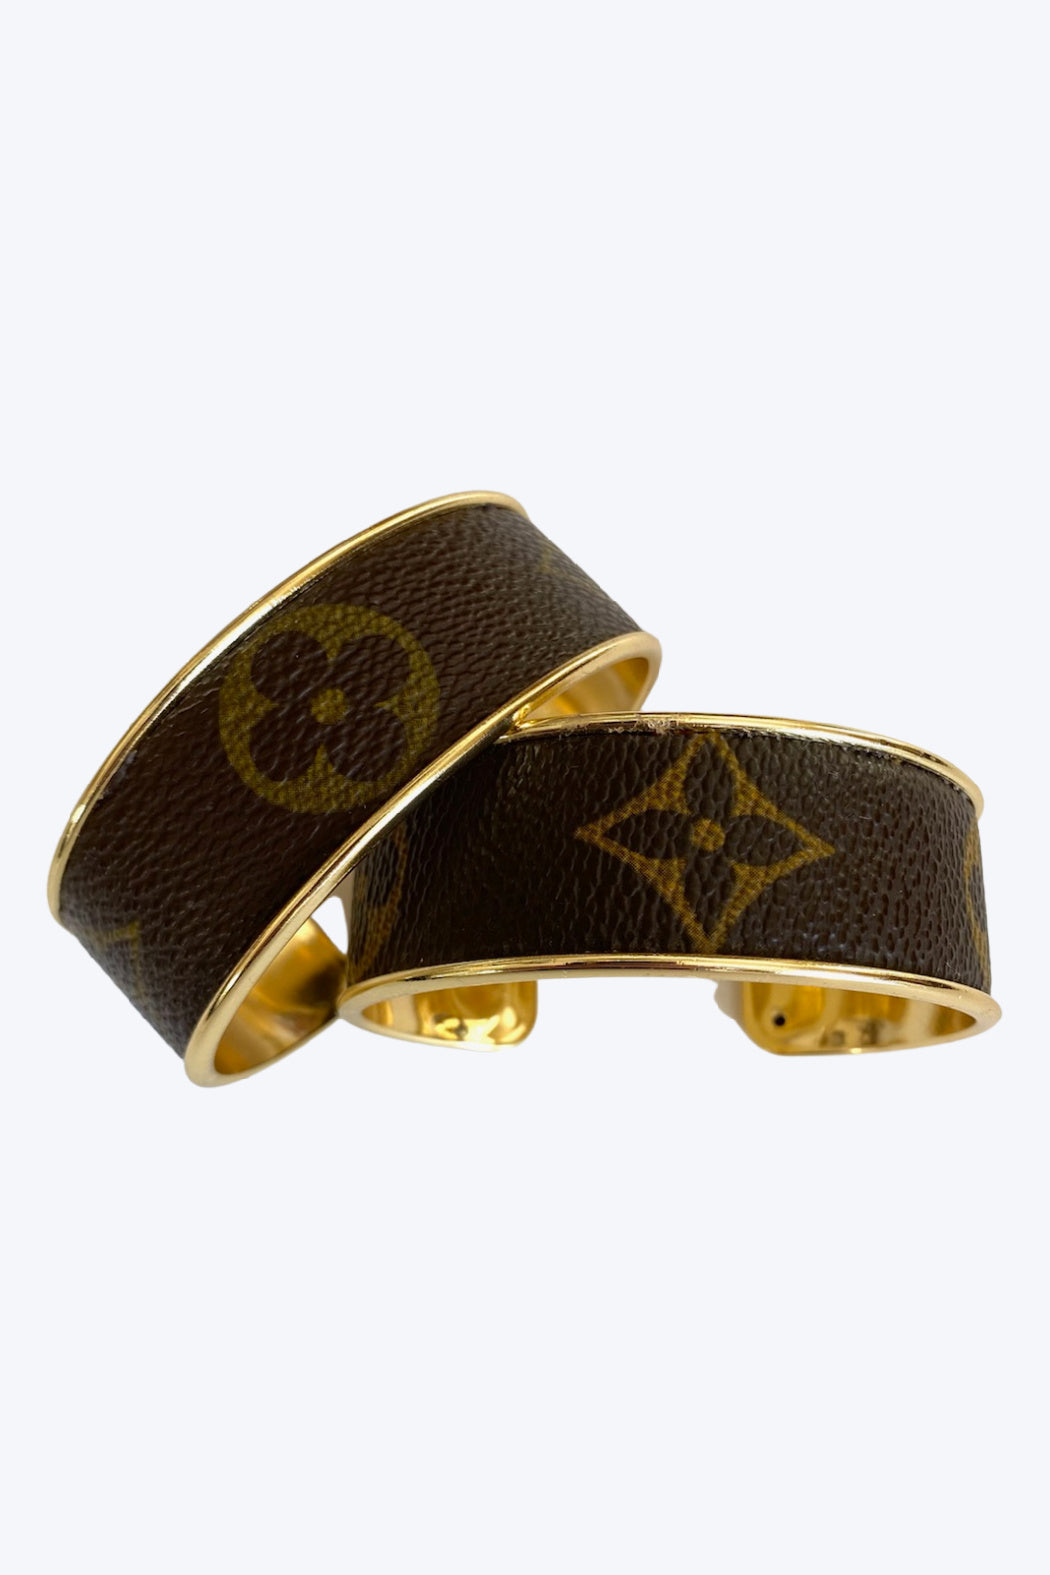 Louis Vuitton Up-Cycled Channel Cuff Bracelet - Embellish Your Life 